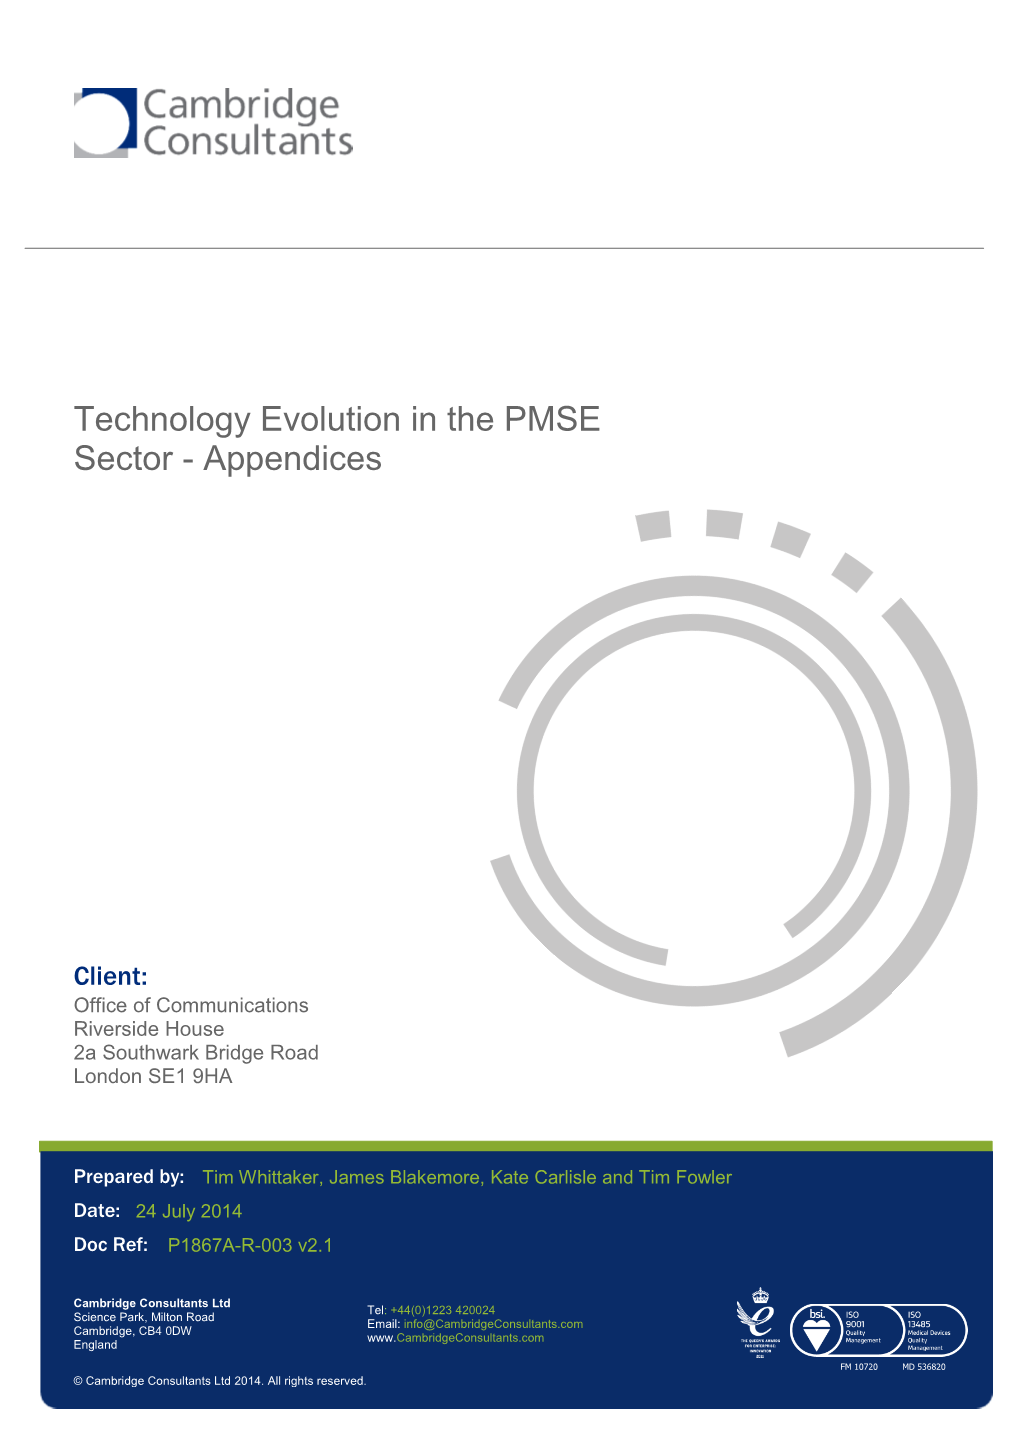 Technology Evolution in the PMSE Sector - Appendices